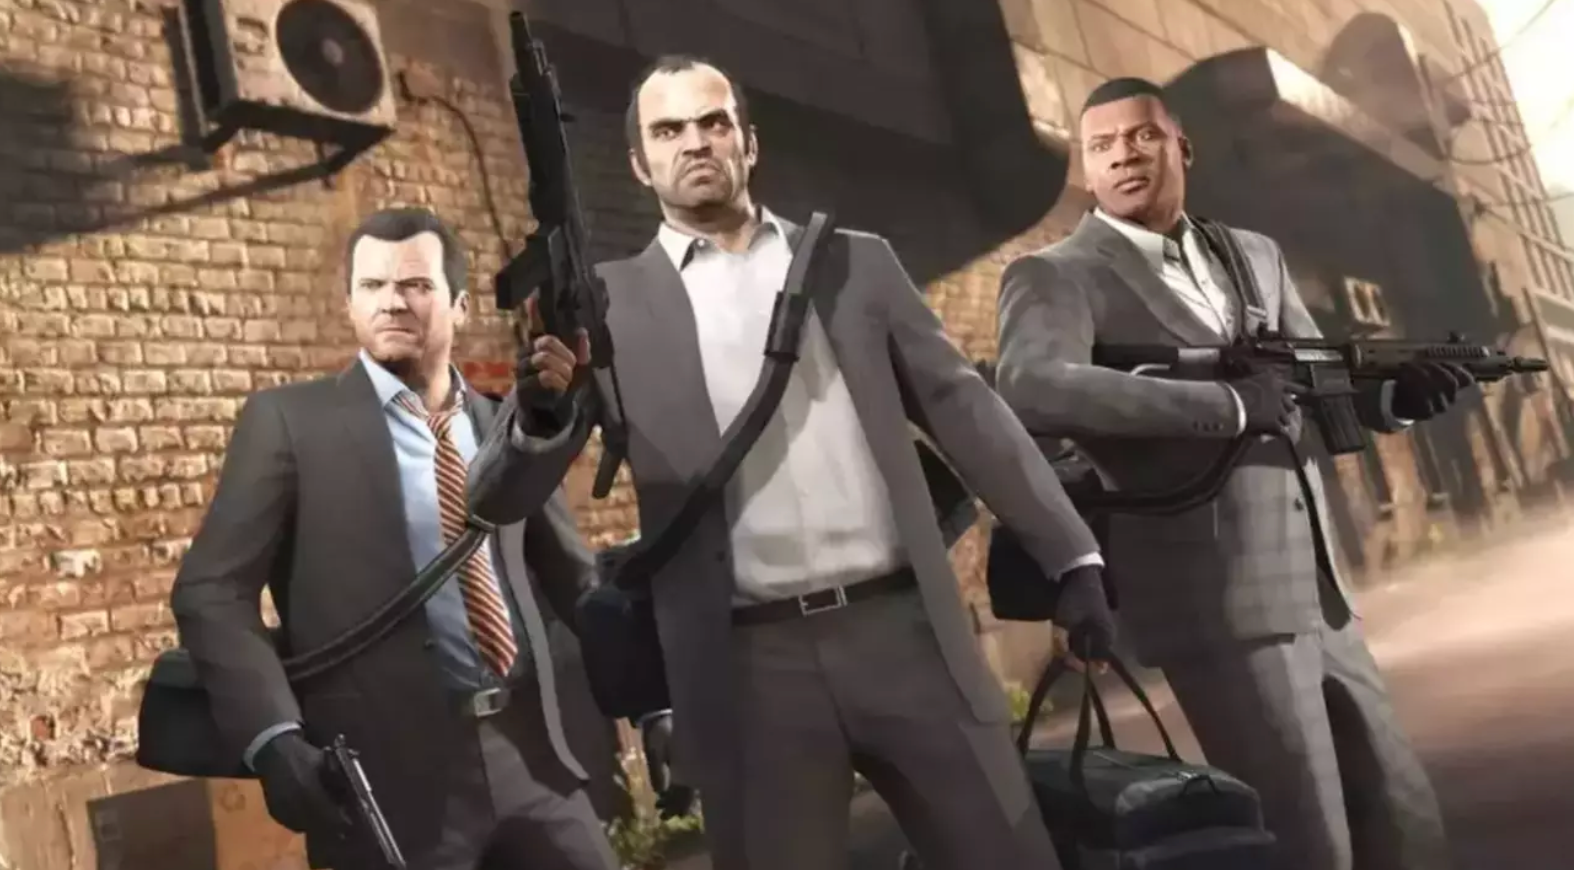 GTA 6 devs fuming after trailer leak robs them of the official